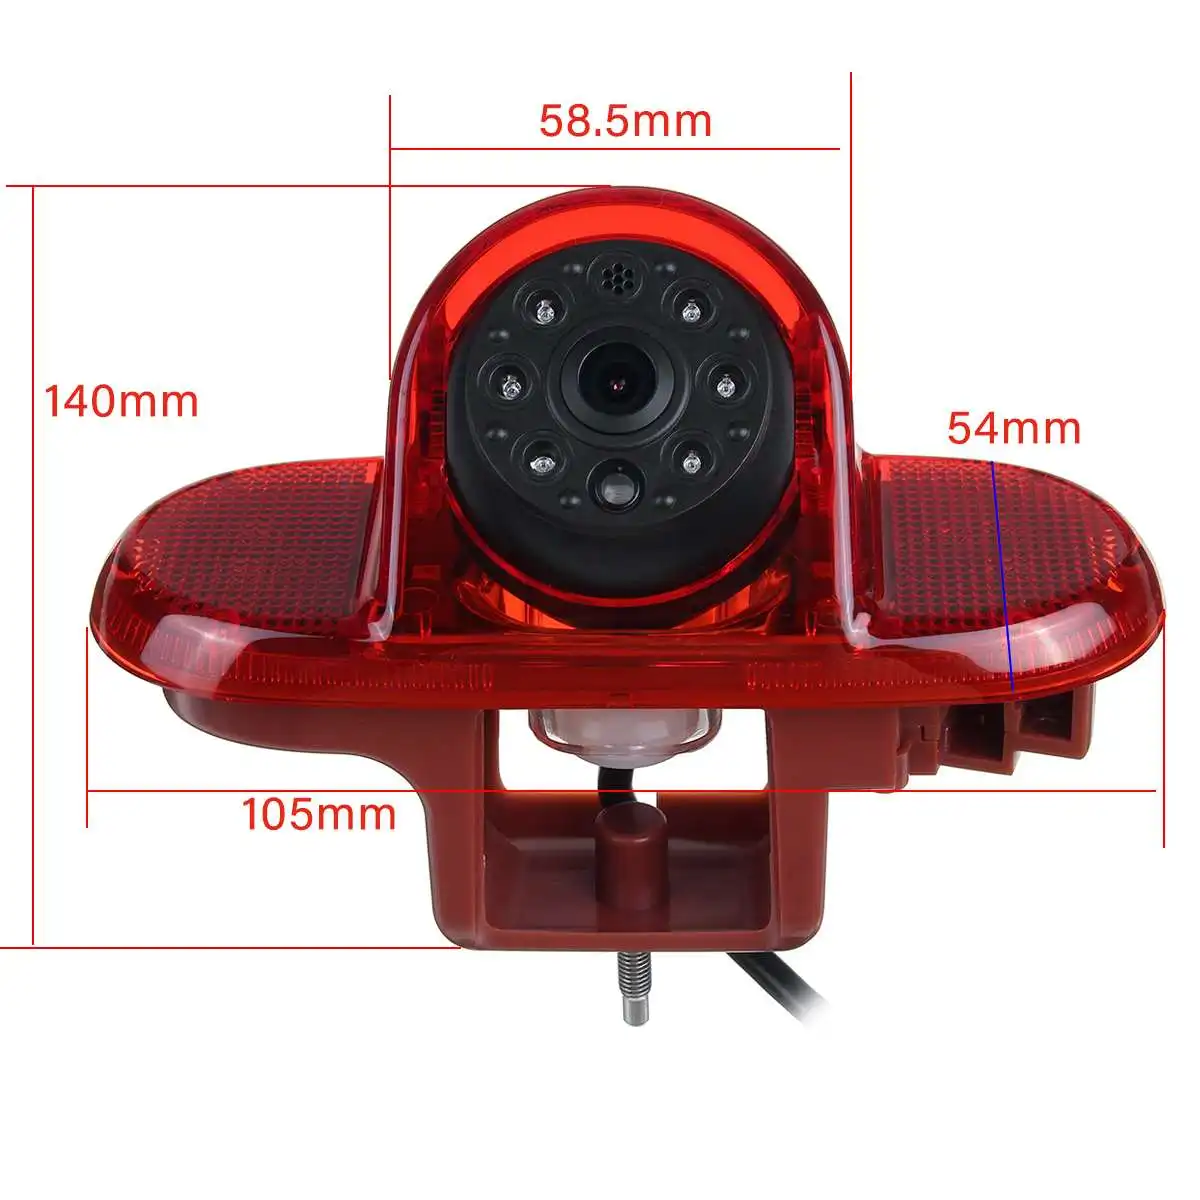 

CCD HD Car Rear View Camera Backup Parking Brake Light for Renault Trafic 2001-14 for Vauxhall Vivaro 2001-14 for Combo 2001-11